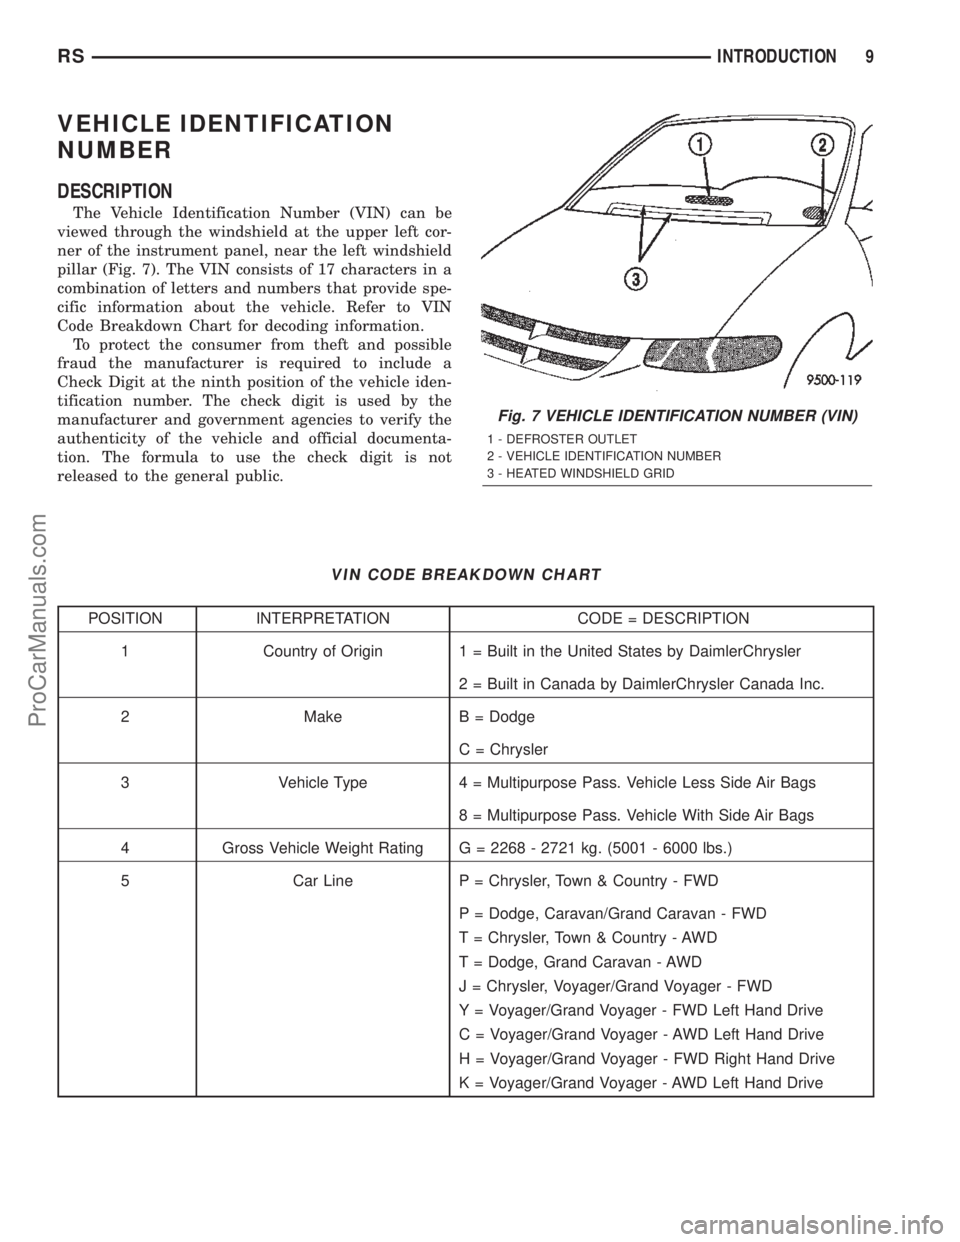 CHRYSLER TOWN AND COUNTRY 2002  Service Manual VEHICLE IDENTIFICATION
NUMBER
DESCRIPTION
The Vehicle Identification Number (VIN) can be
viewed through the windshield at the upper left cor-
ner of the instrument panel, near the left windshield
pill